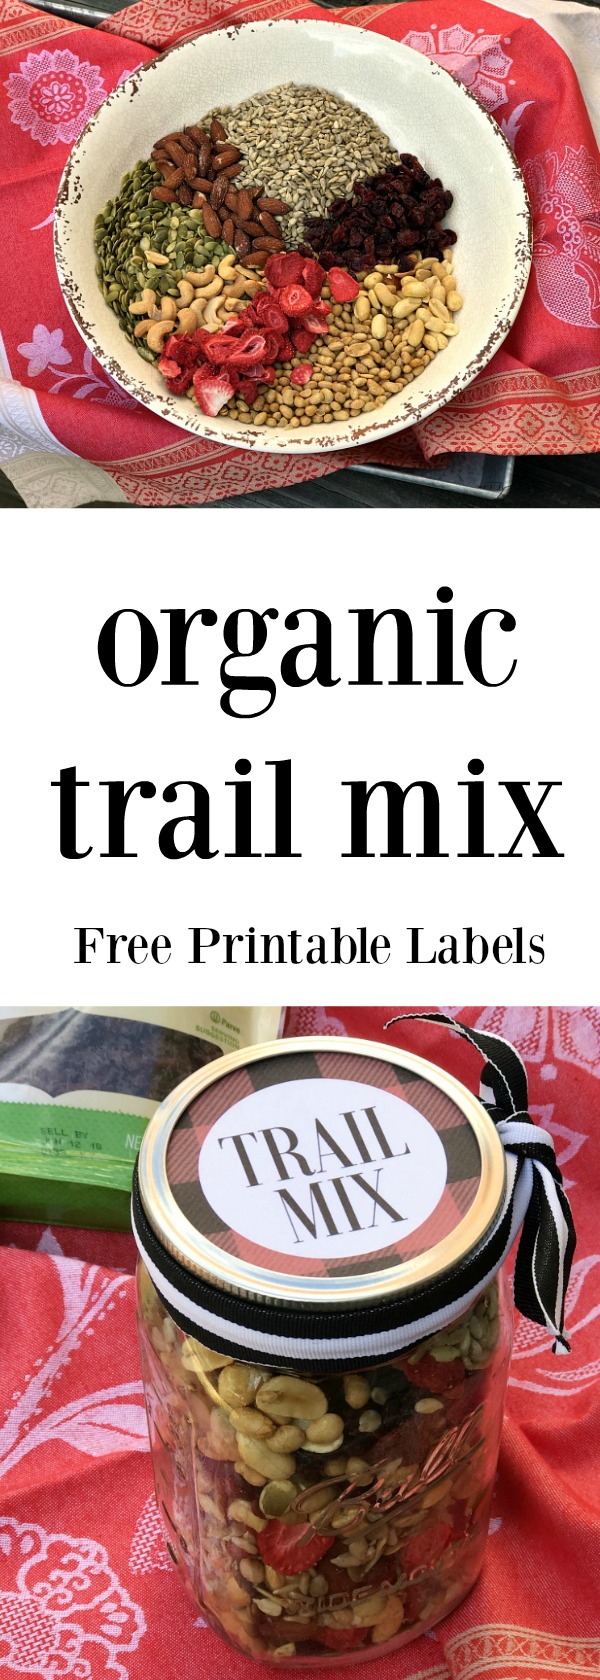 Trail mix is made even better when using organic and tasty mix-ins. Give the gift of flavor when you whip up a batch of this trail mix and gift it with this free printable mason jar label! 